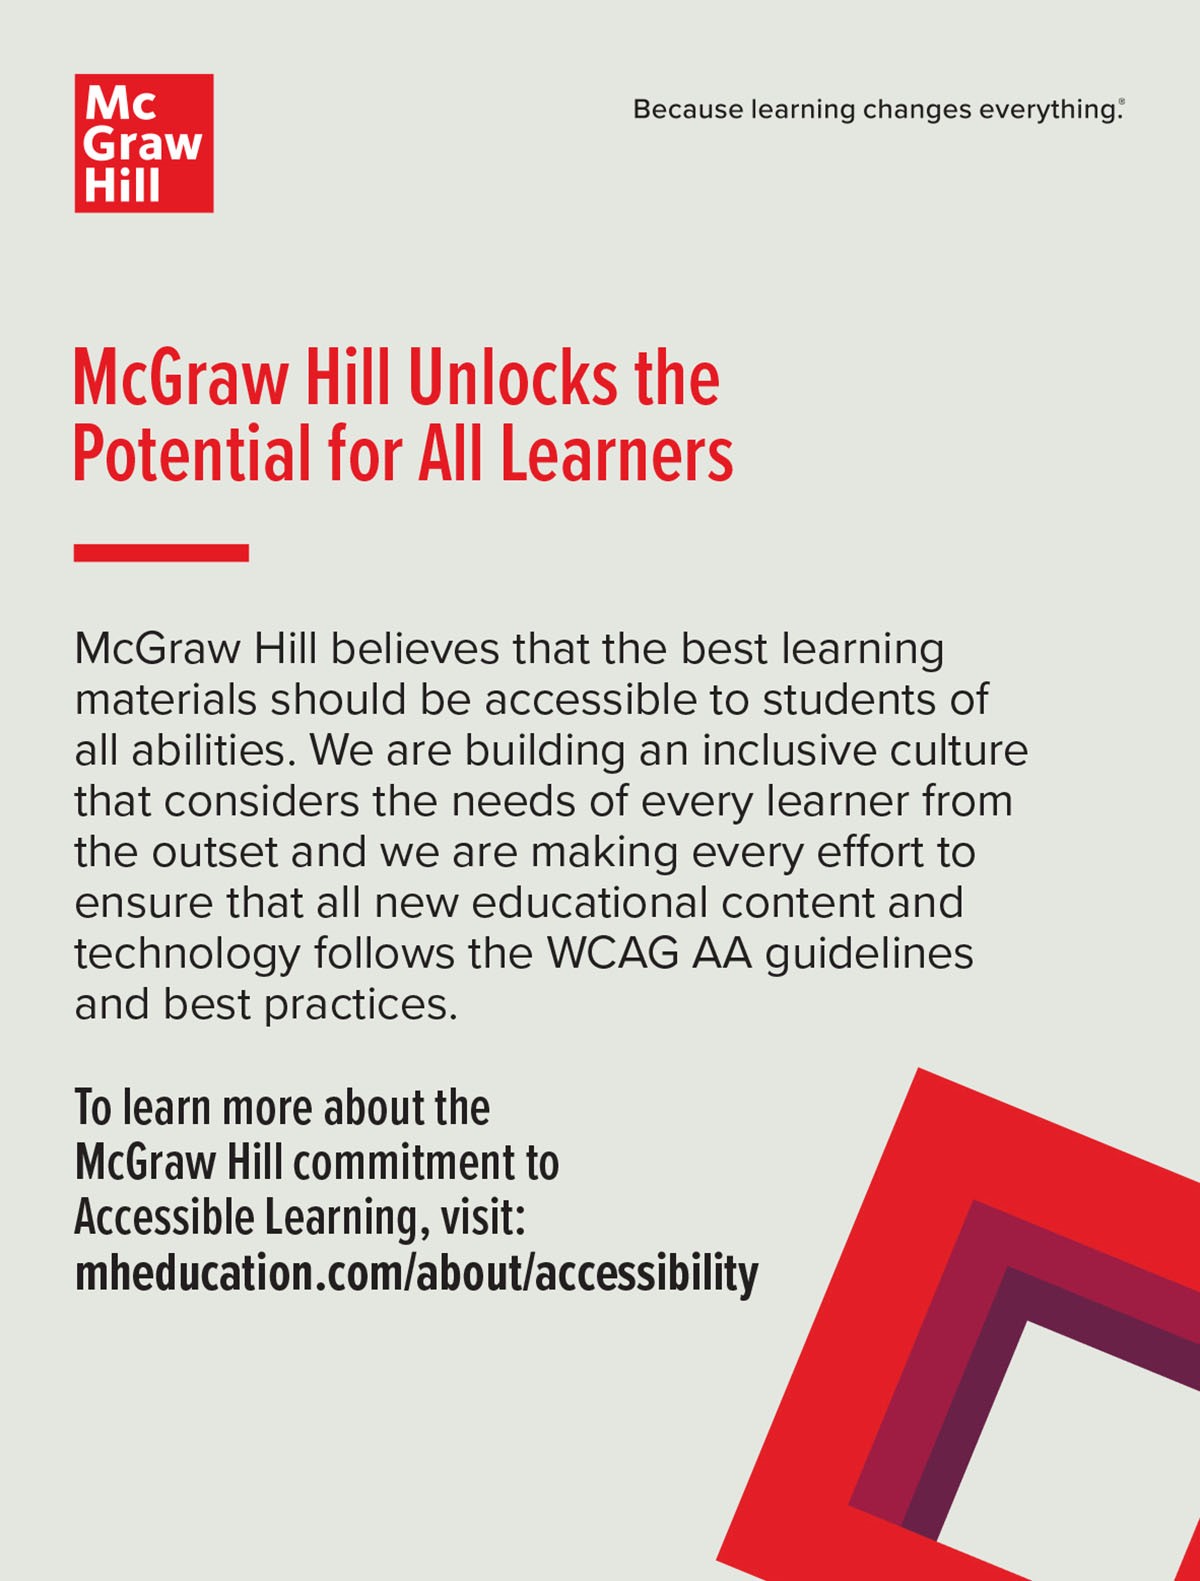 McGraw Hill Unlocks the Potential for All Learners. McGraw Hill believes that the best learning materials should be accessible to students of all abilities. We are building an inclusive culture that considers the needs of every learner from the outset and we are making every effort to ensure that all new educational content and technology follows the WCAG AA guidelines and best practices. To learn more about the McGraw Hill commitment to Accessible Learning, visit: mheducation.com/about/accessibility 